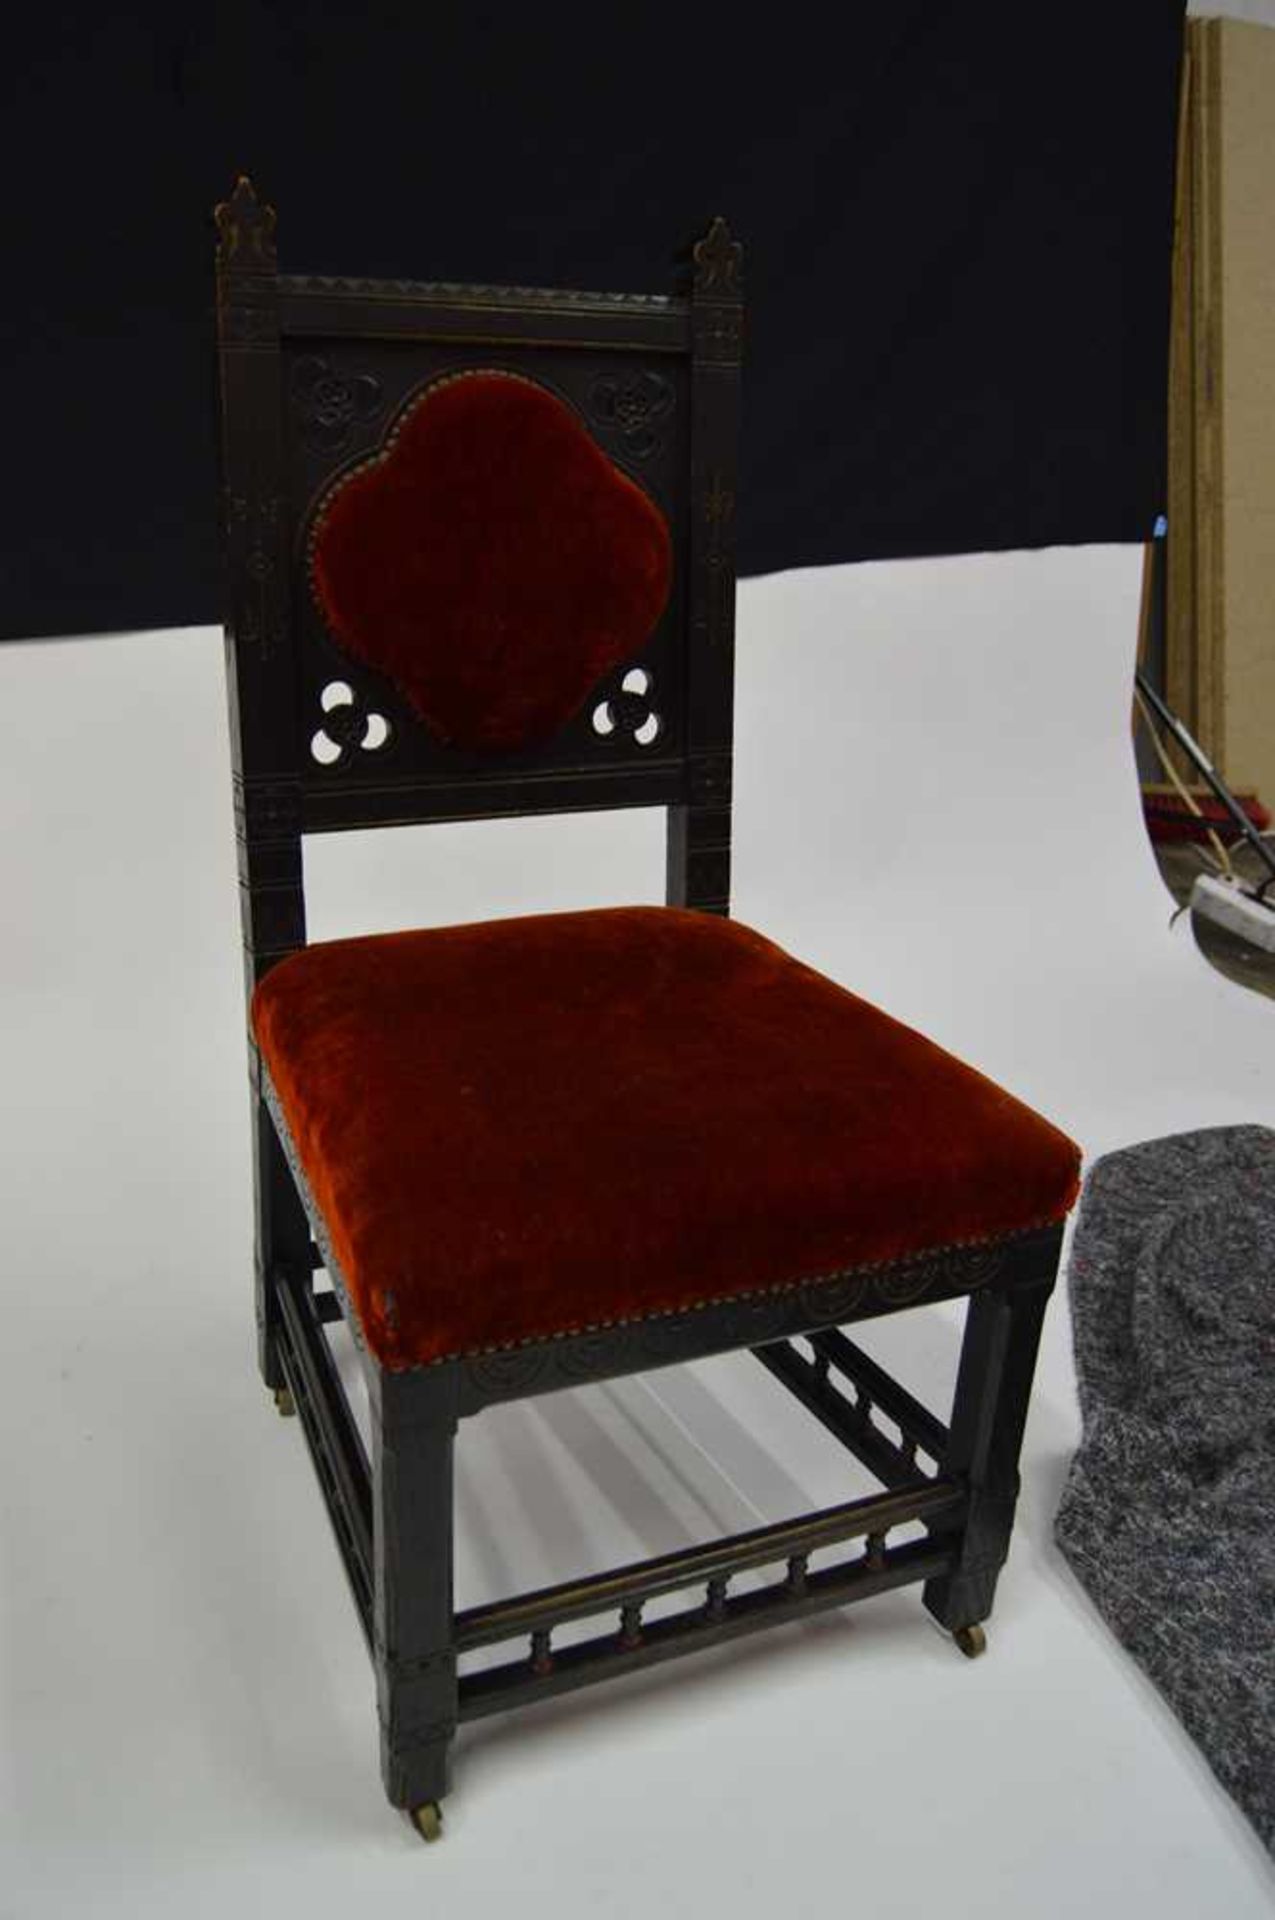 JOHN MOYR SMITH (1839-1912) (ATTRIBUTED DESIGNER) FOR COX & SON, LONDON GOTHIC REVIVAL SIDE CHAIR, - Image 3 of 18